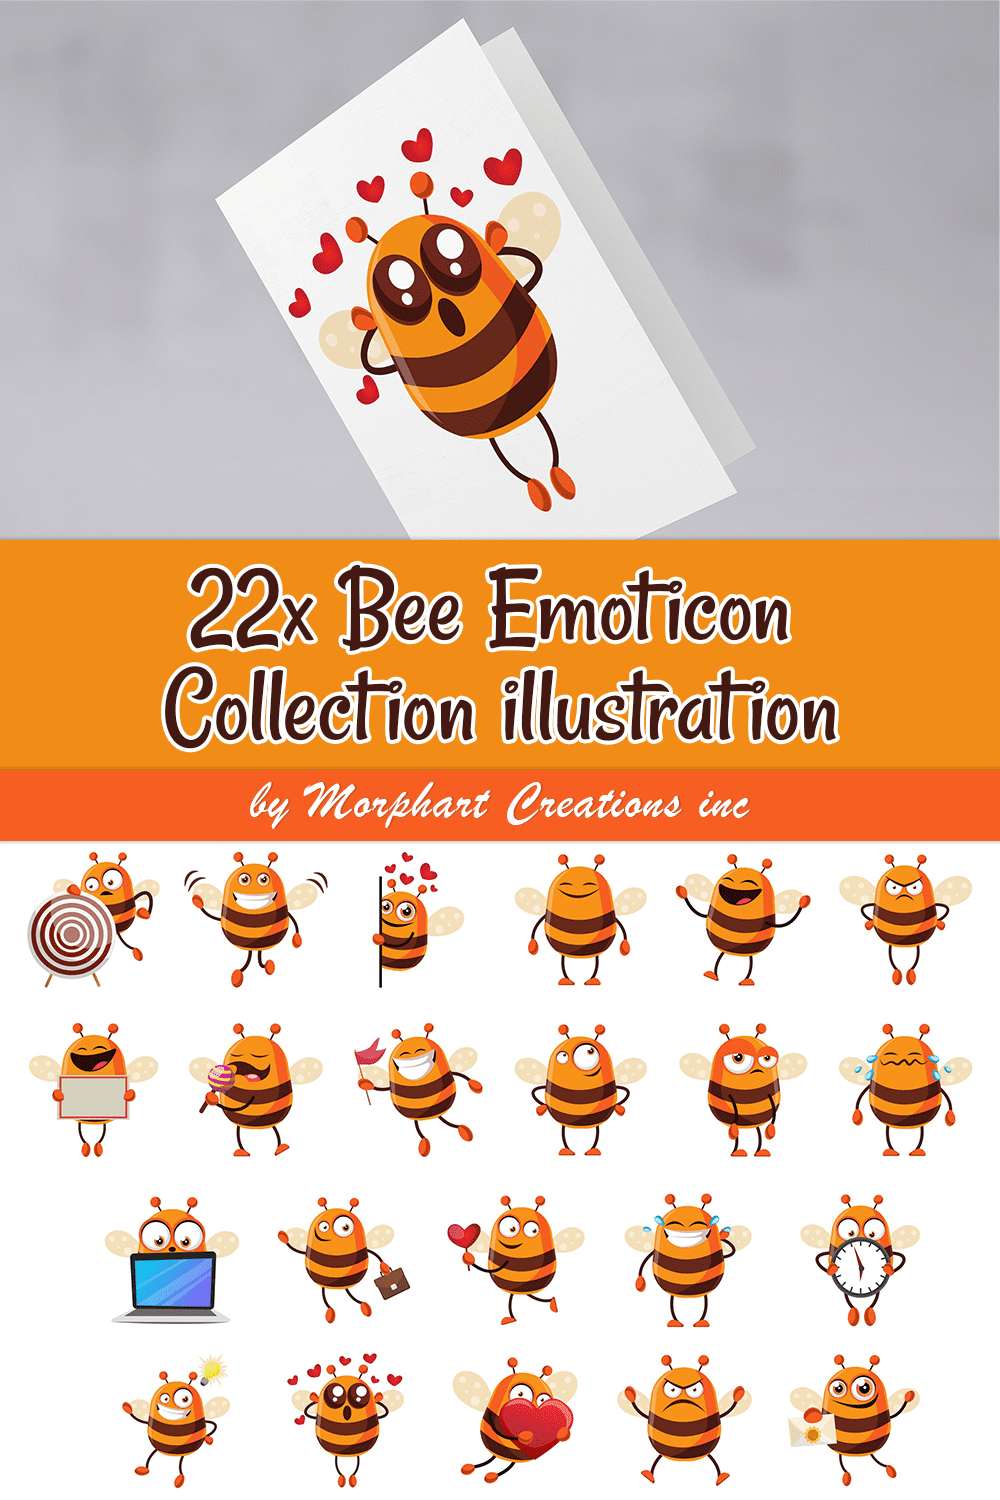 Pak enchanting images of bees emoticons.